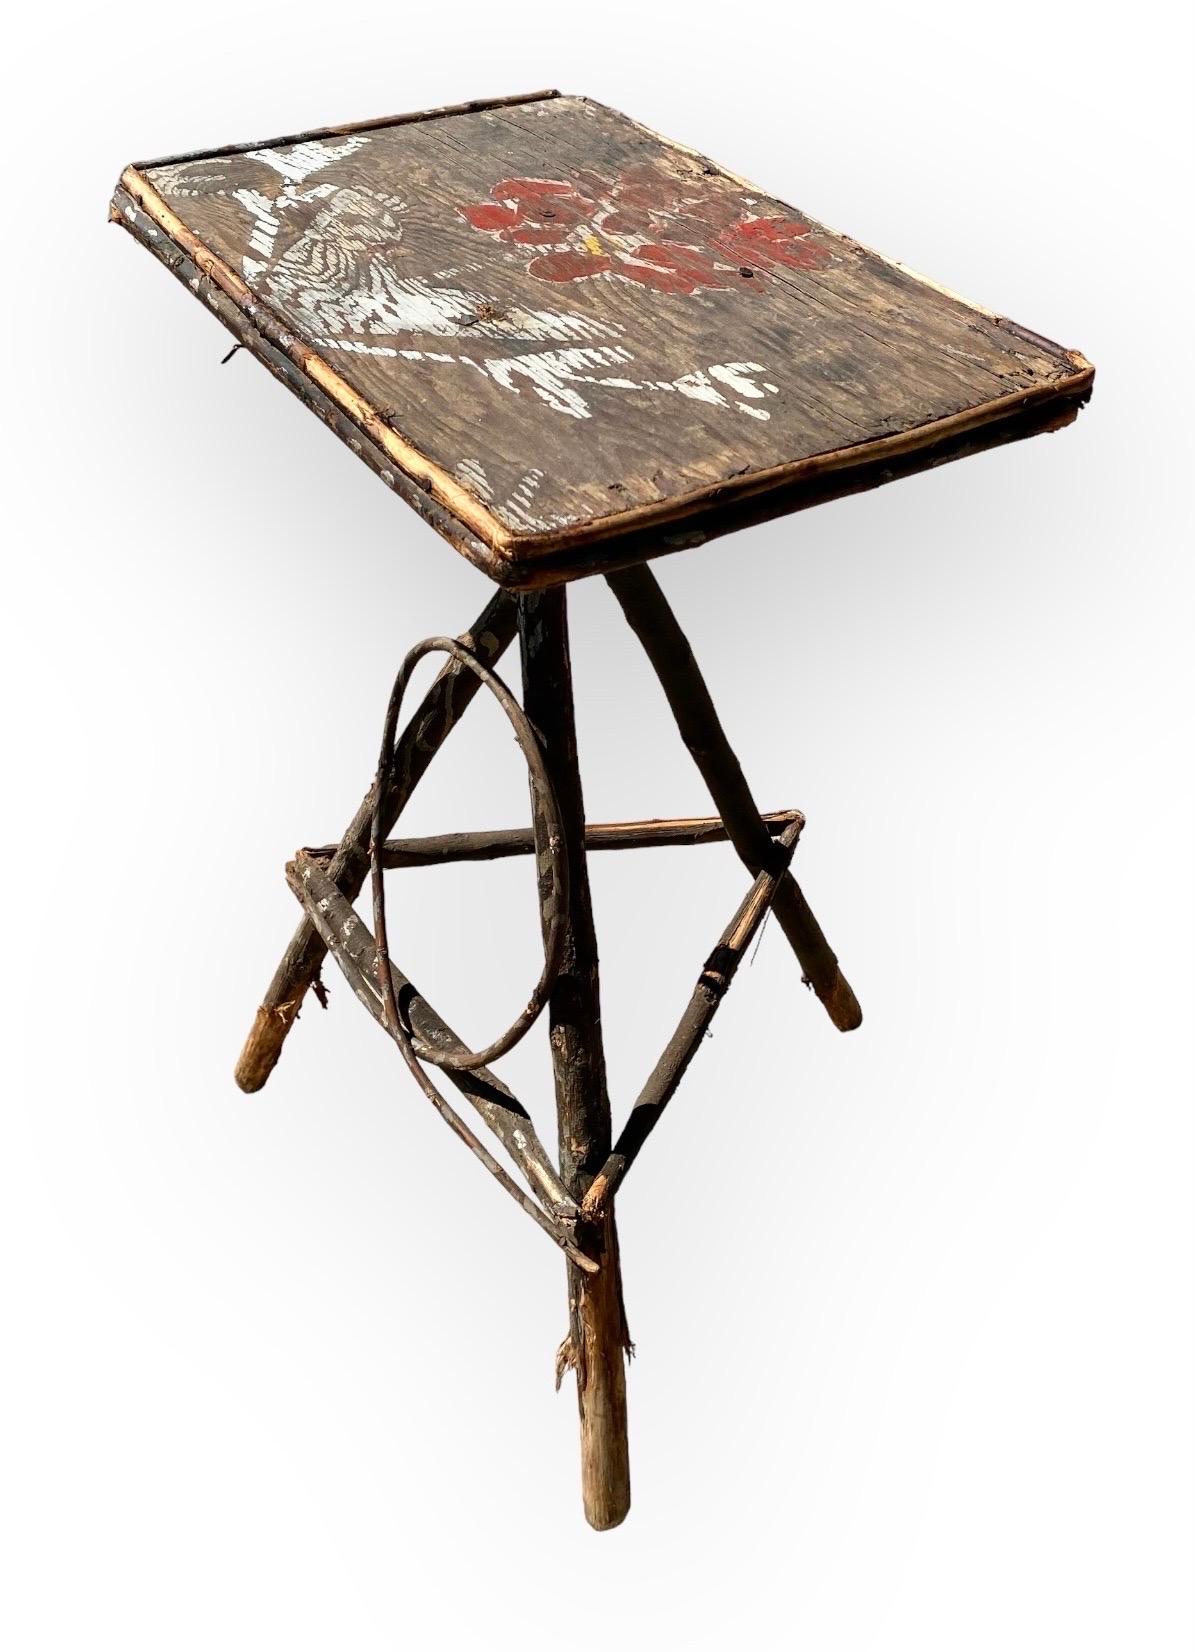 This is an original Adirondack stand or side table with a dark finish decorated with silver painted leaves and a charming aged folk art brick red bird and floral study on the top. The base has a vine and end caps on all the wood and cross hatching